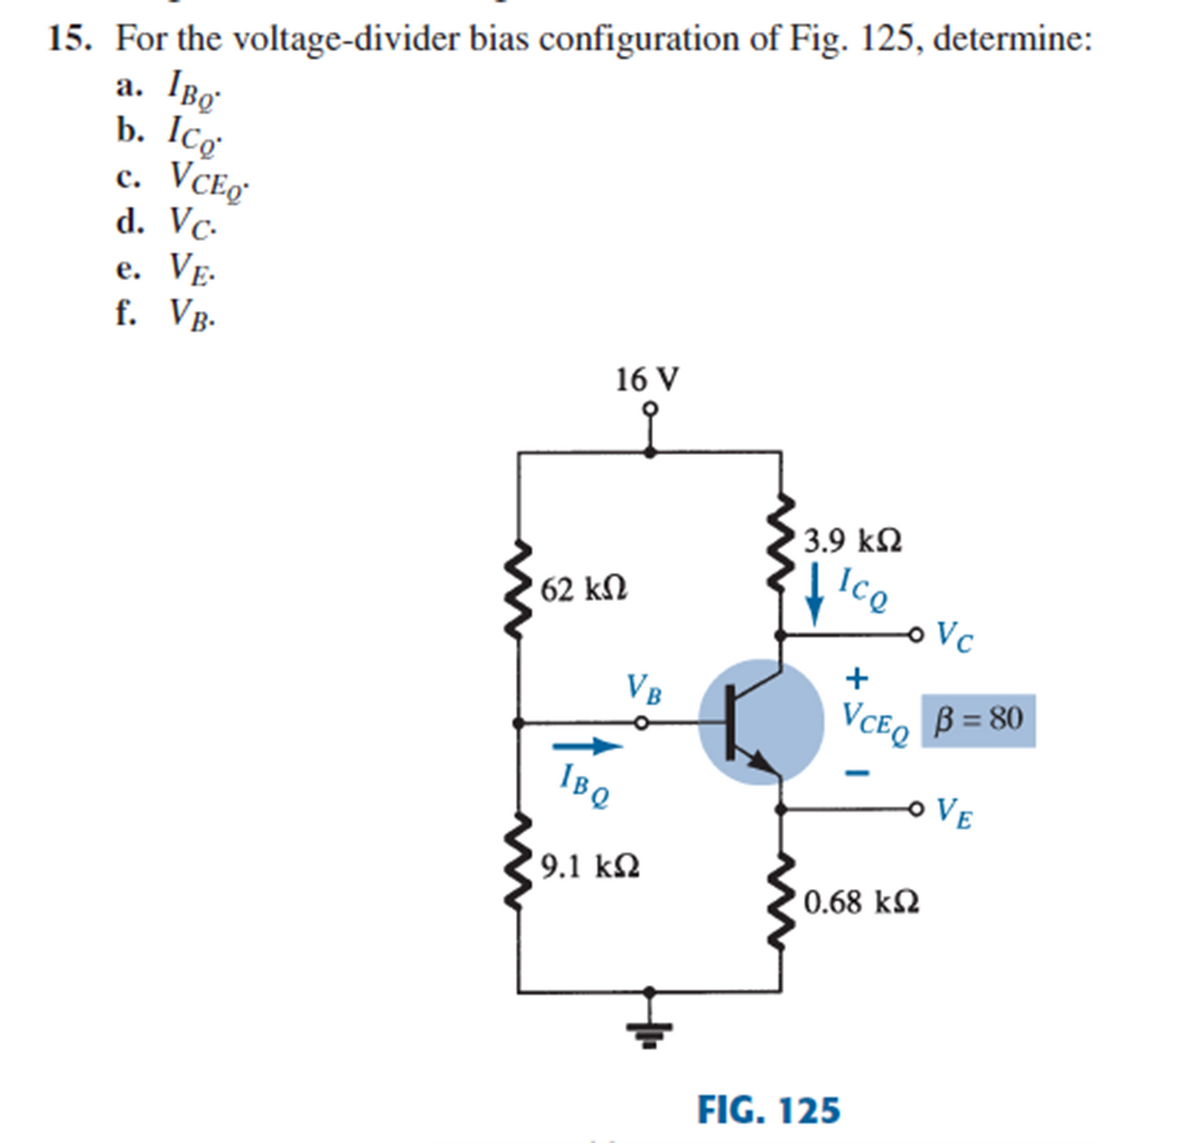 15. For the voltage-divider bias configuration of Fig. 125, determine:
IBo
b. Icơ
VCEg
d. Vc-
e. VE-
f. Vg.
а.
с.
е.
16 V
3.9 kQ
62 kN
o Vc
VB
VCE, B= 80
IBQ
o VE
9.1 kN
0.68 k2
FIG. 125
